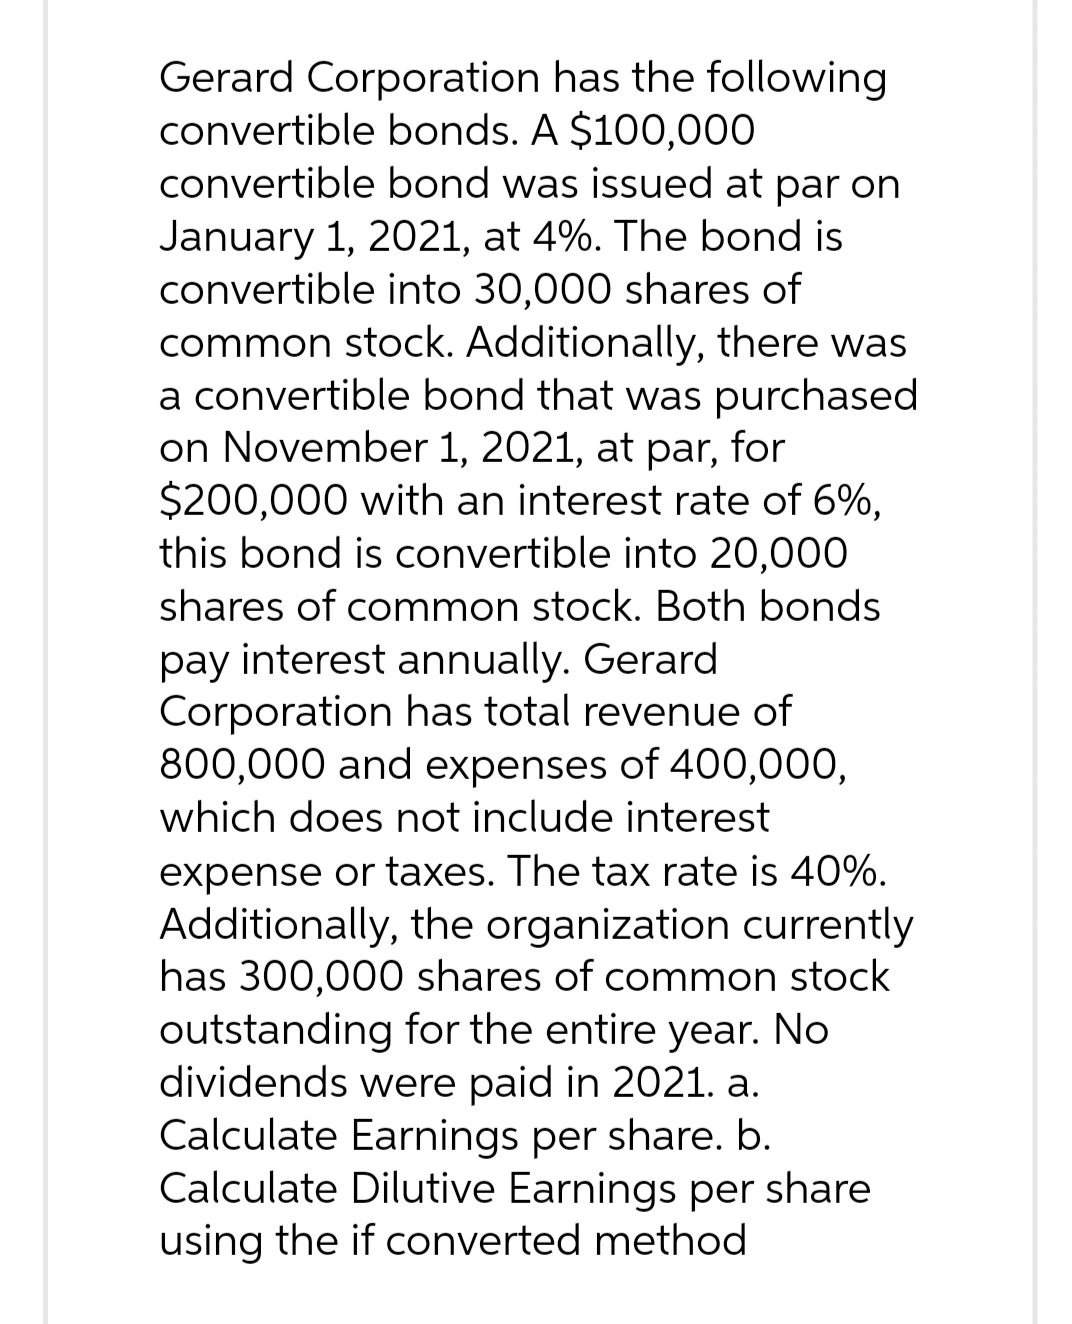 Gerard Corporation has the following
convertible bonds. A $100,000
convertible bond was issued at par on
January 1, 2021, at 4%. The bond is
convertible into 30,000 shares of
common stock. Additionally, there was
a convertible bond that was purchased
on November 1, 2021, at par, for
$200,000 with an interest rate of 6%,
this bond is convertible into 20,000
shares of common stock. Both bonds
pay interest annually. Gerard
Corporation has total revenue of
800,000 and expenses of 400,000,
which does not include interest
expense or taxes. The tax rate is 40%.
Additionally, the organization currently
has 300,000 shares of common stock
outstanding for the entire year. No
dividends were paid in 2021. a.
Calculate Earnings per share. b.
Calculate Dilutive Earnings per share
using the if converted method